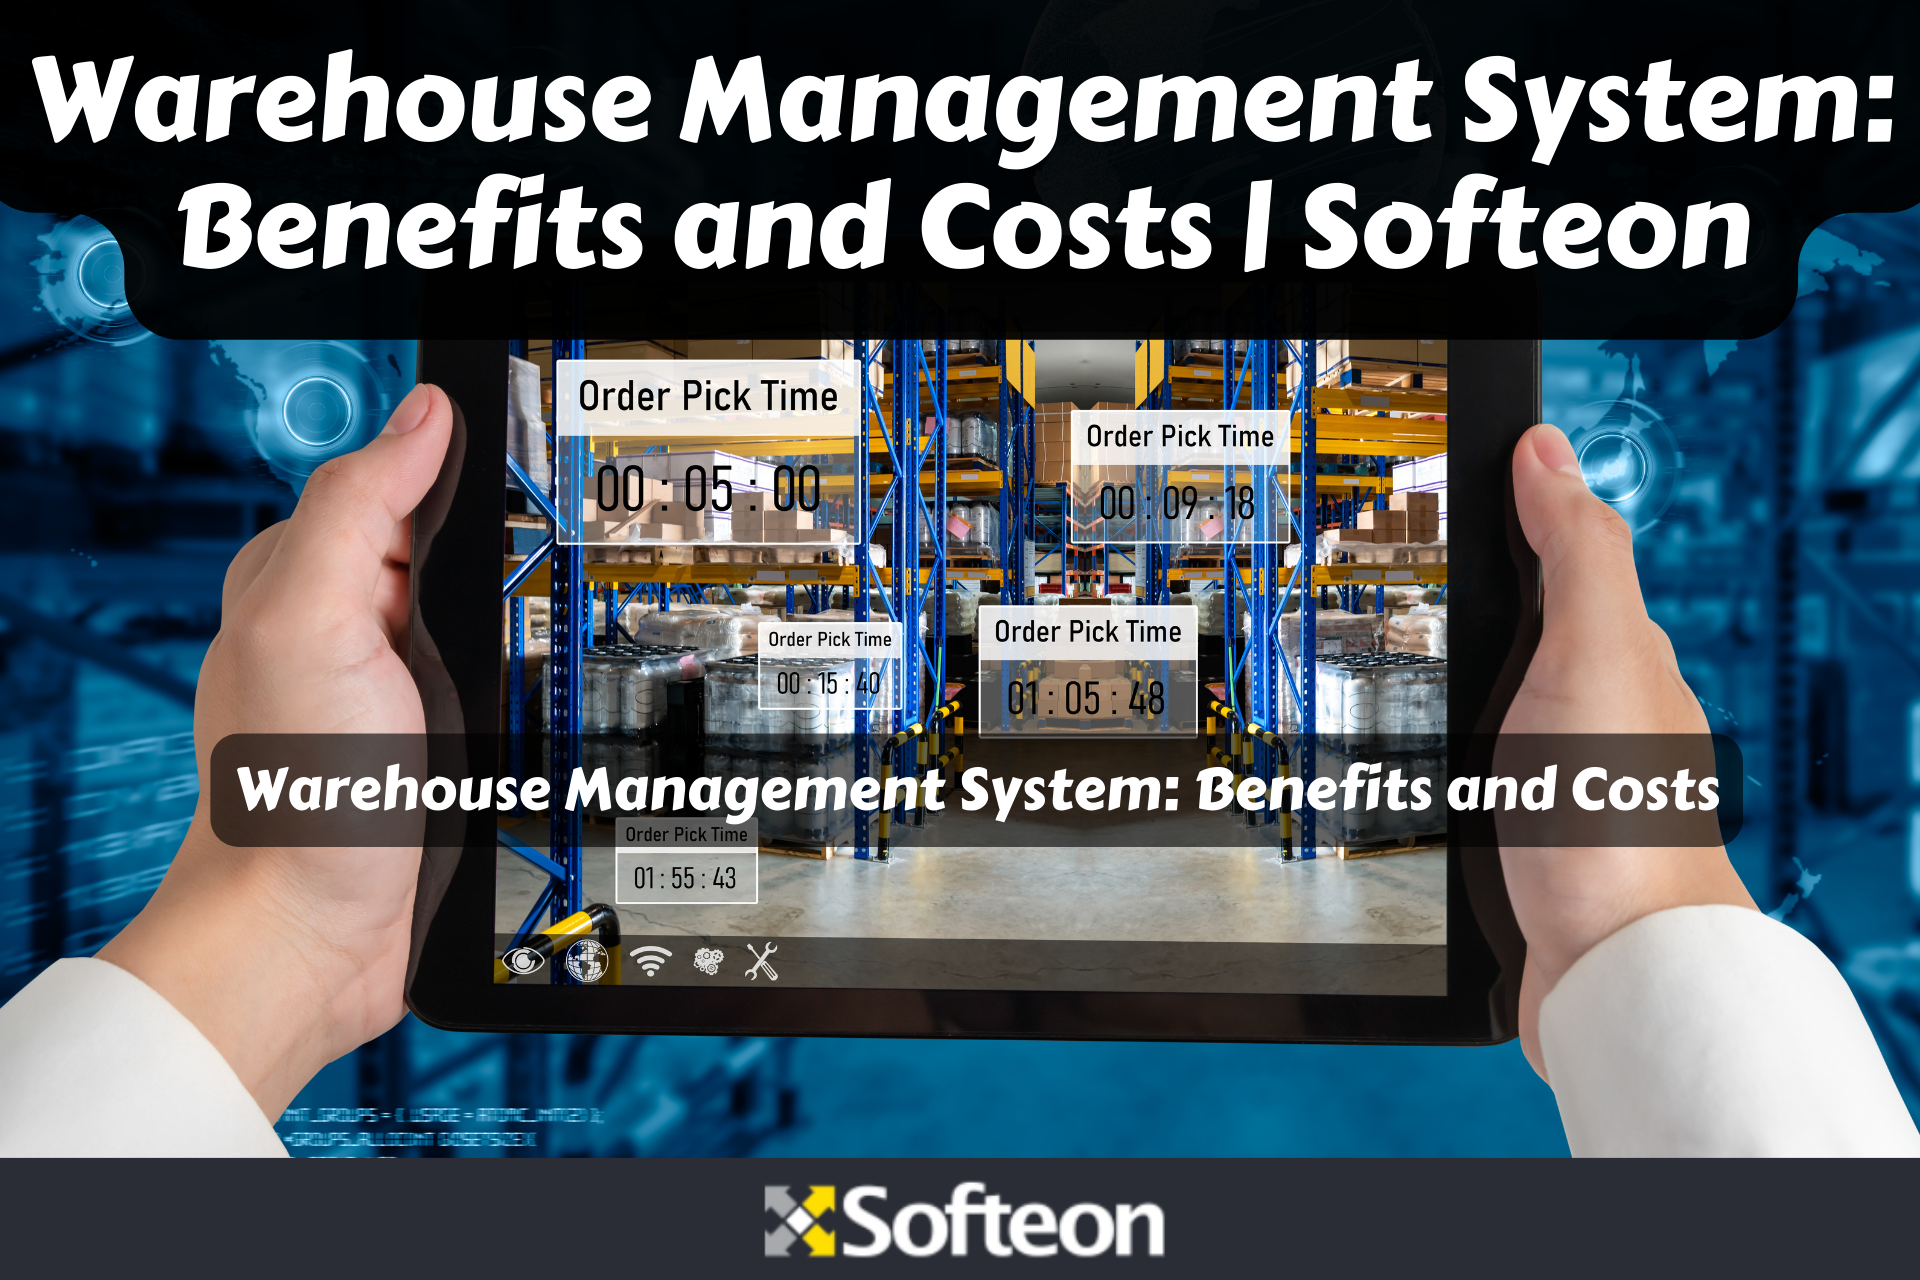 Warehouse Management System: Benefits and Costs